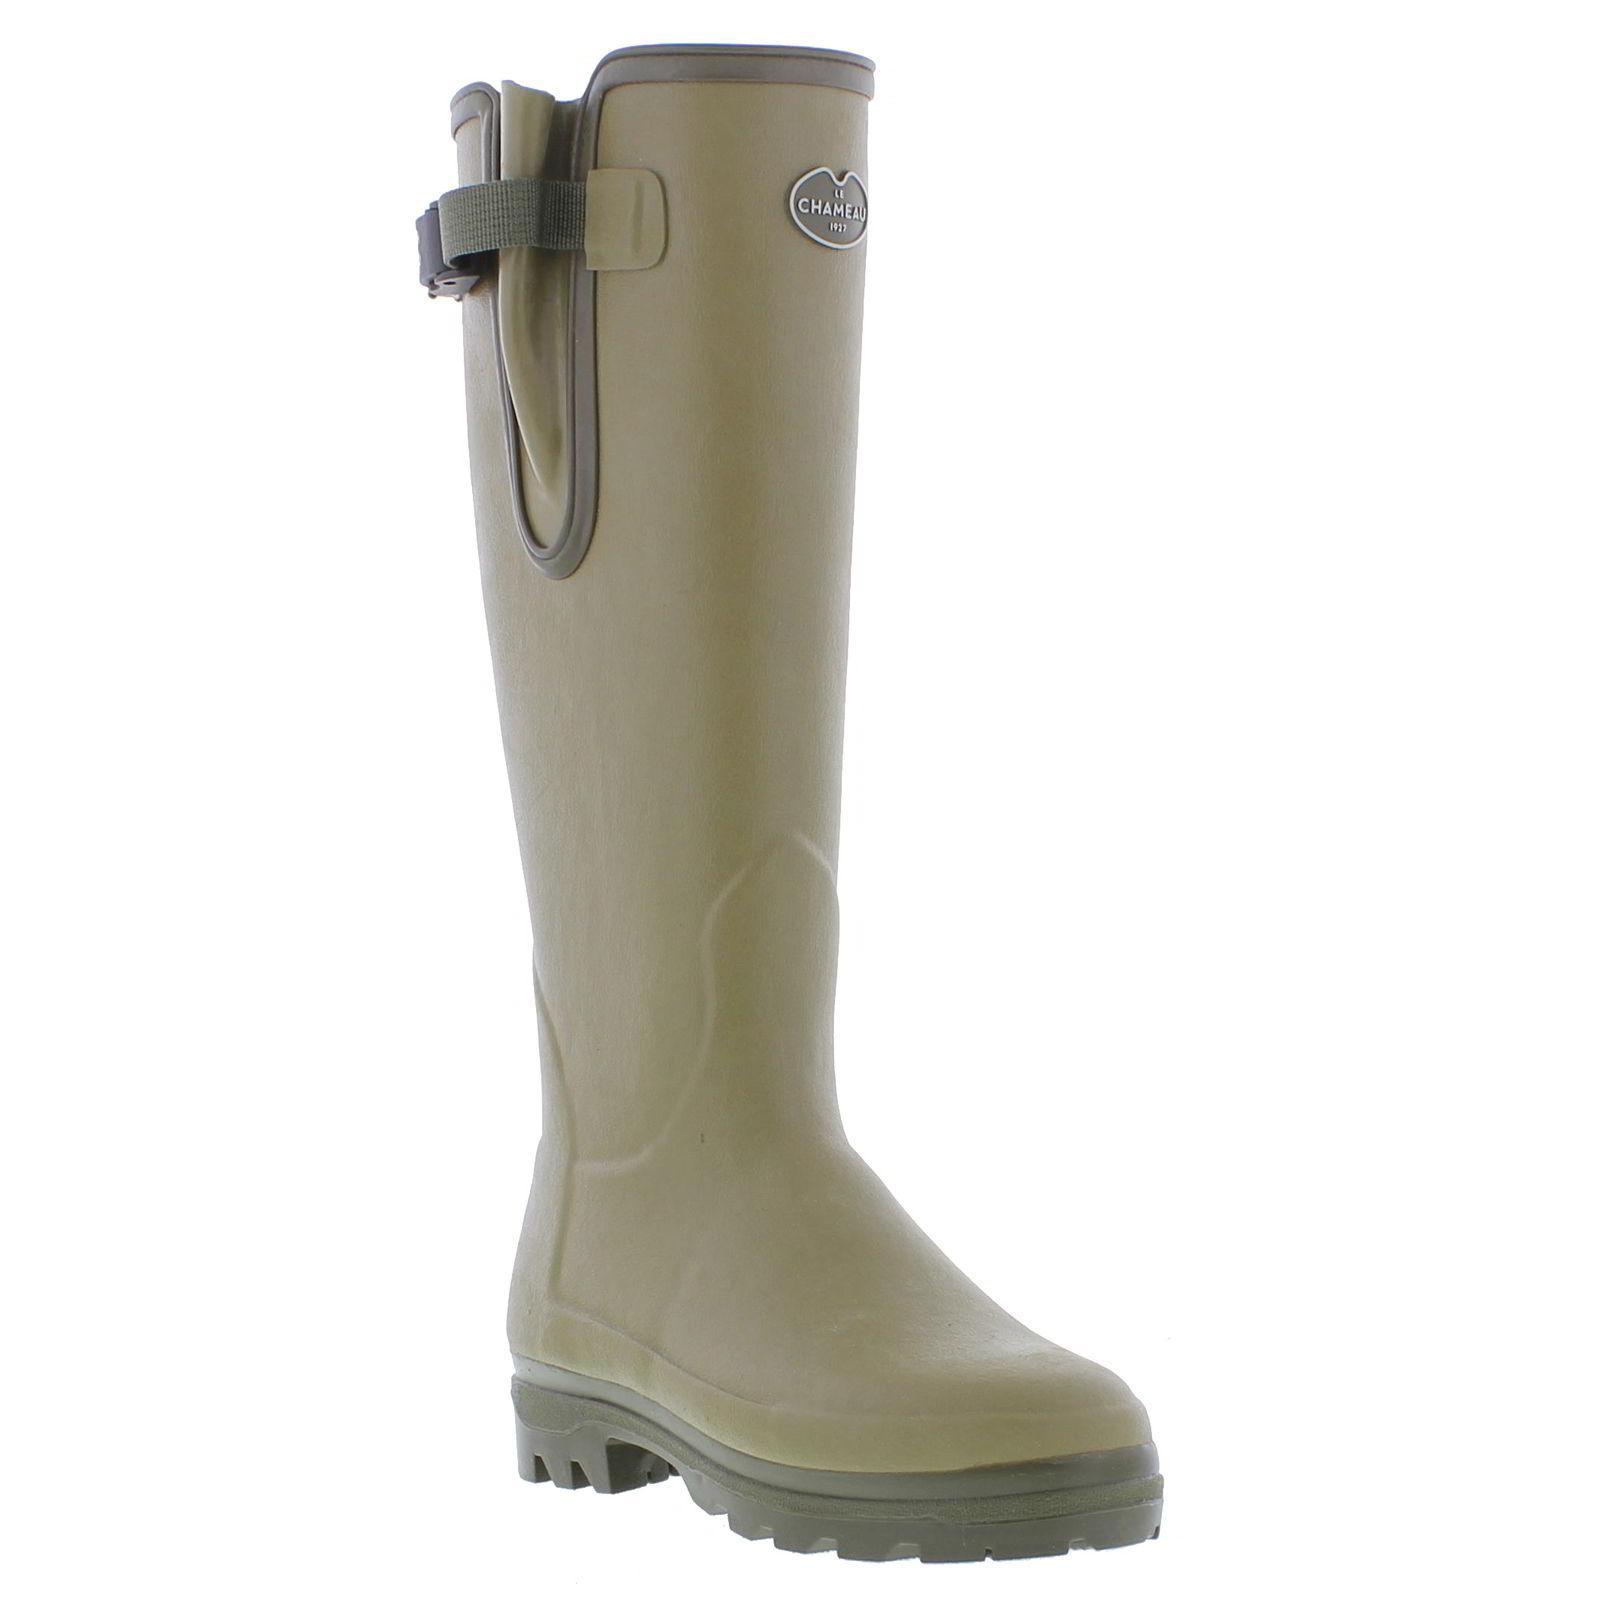 Le Chameau Vierzonord Neoprene Lined Wellies Rain Boots - Vert in Green ...